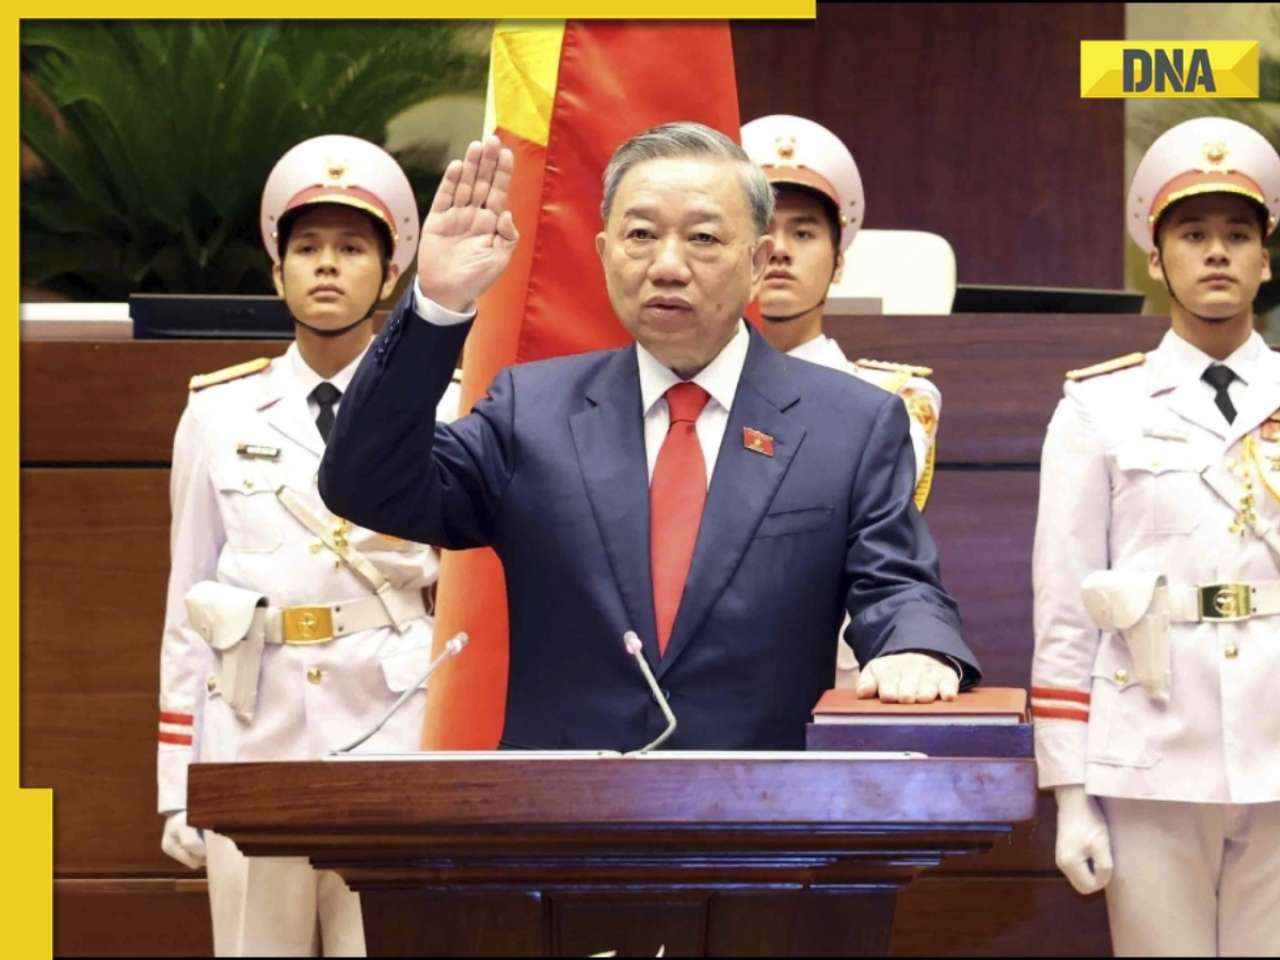 Vietnam’s top security official To Lam elected as President amid anti-corruption purge